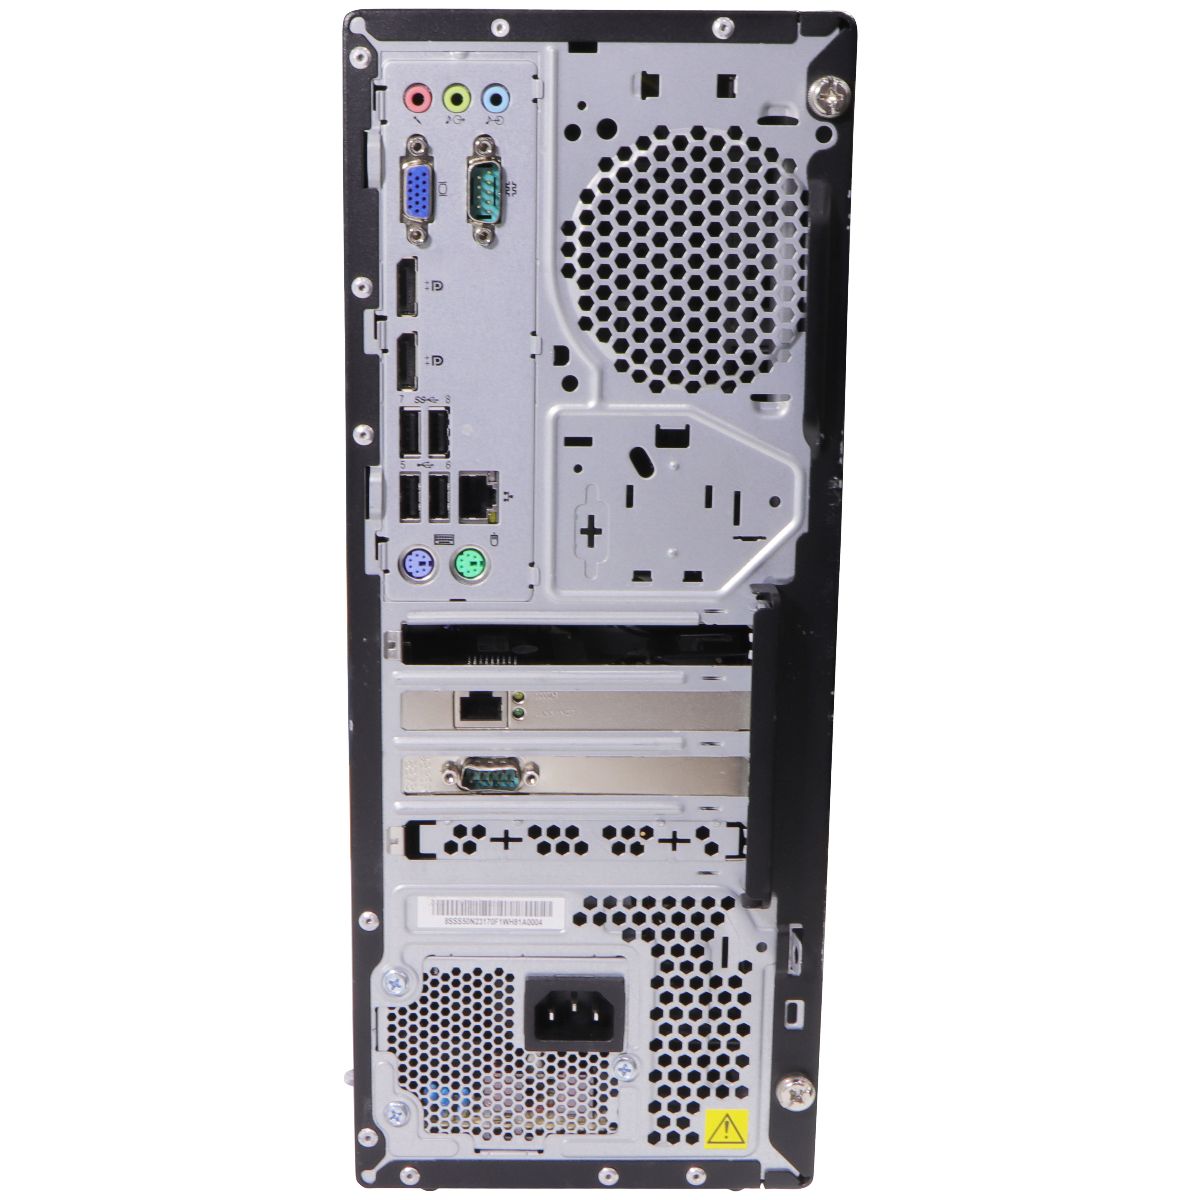 Lenovo ThinkCentre M710t Desktop Tower (10M9000MUS) i5-7400/512GB/8GB/10 Home PC Desktops & All-In-Ones Lenovo    - Simple Cell Bulk Wholesale Pricing - USA Seller